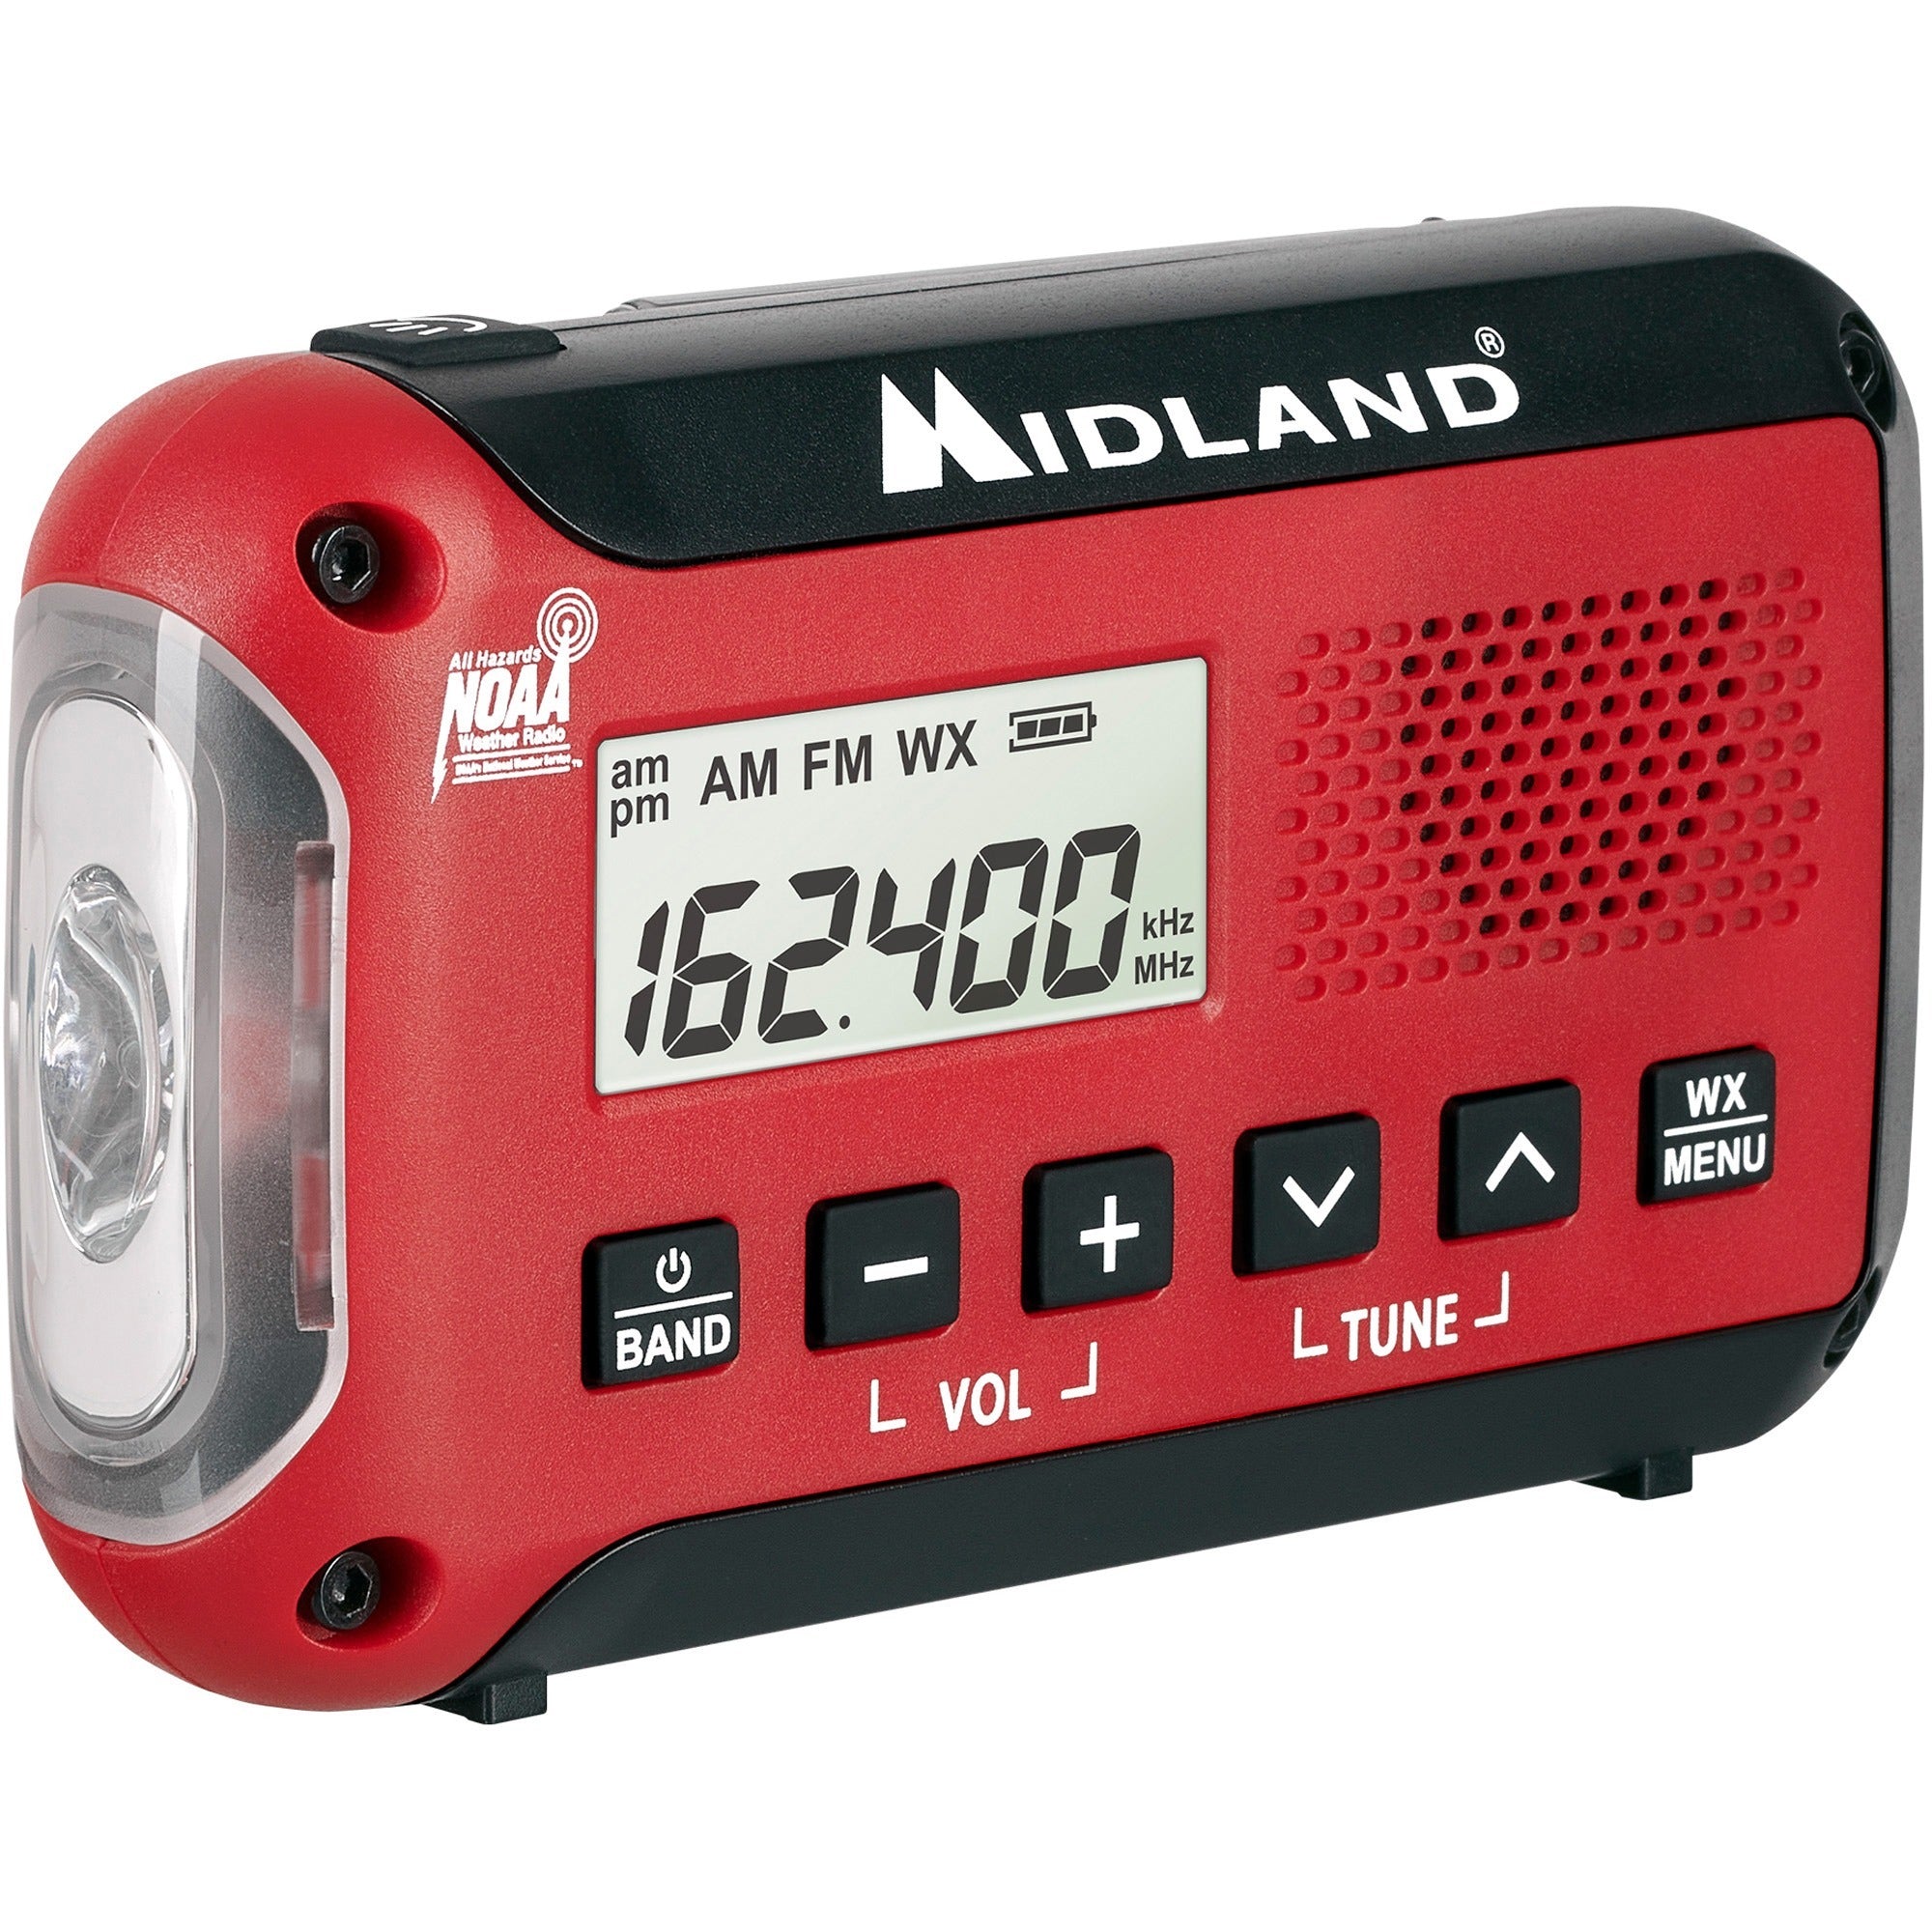 midland-e+ready-compact-emergency-alert-am-fm-weather-radio-for-hiking-weather-fishing-hunting-camping-overlanding-with-noaa-all-hazard-am-fm-portable_mroer10vp - 3